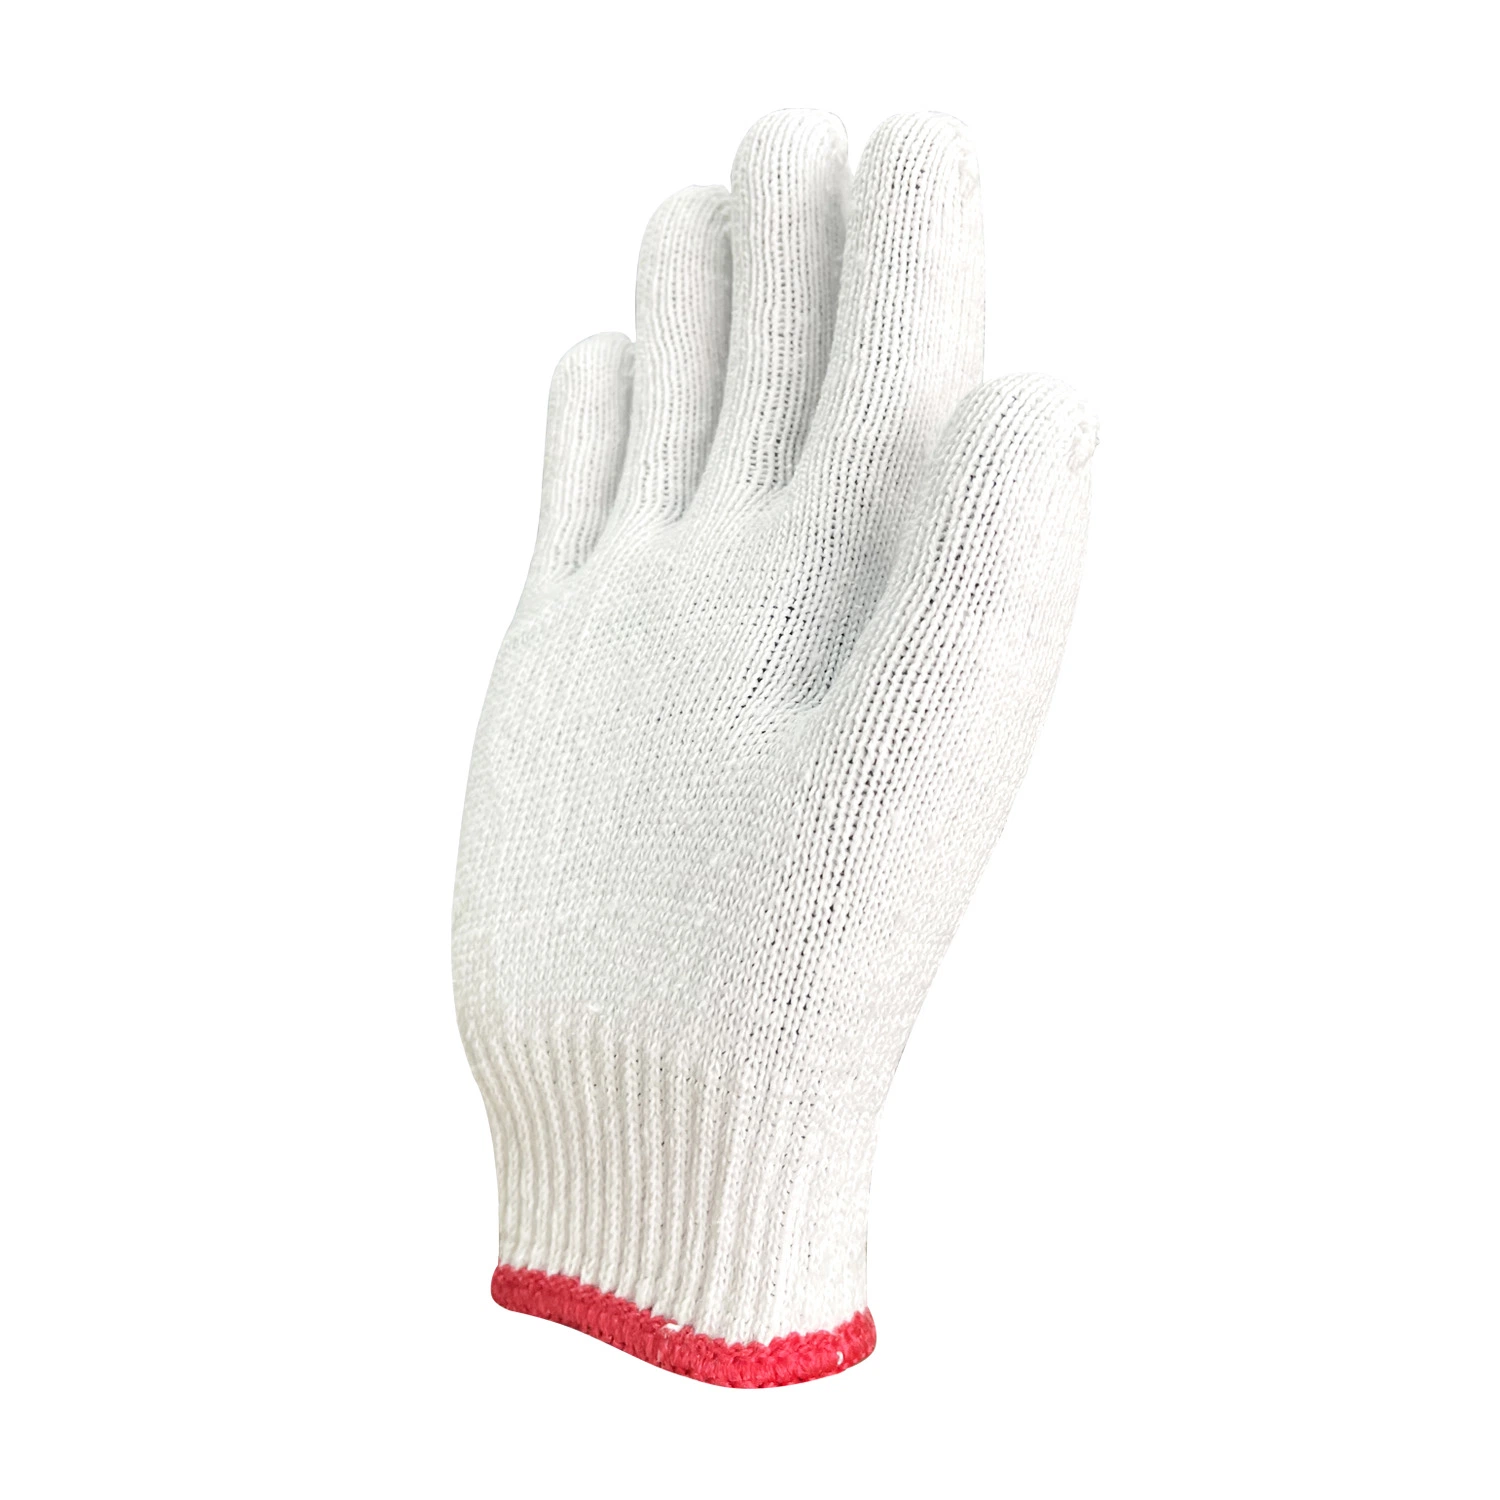 Custom Design Reusable Natural White Cotton Glove Thick Comfortable Hand Protection Safety Gloves